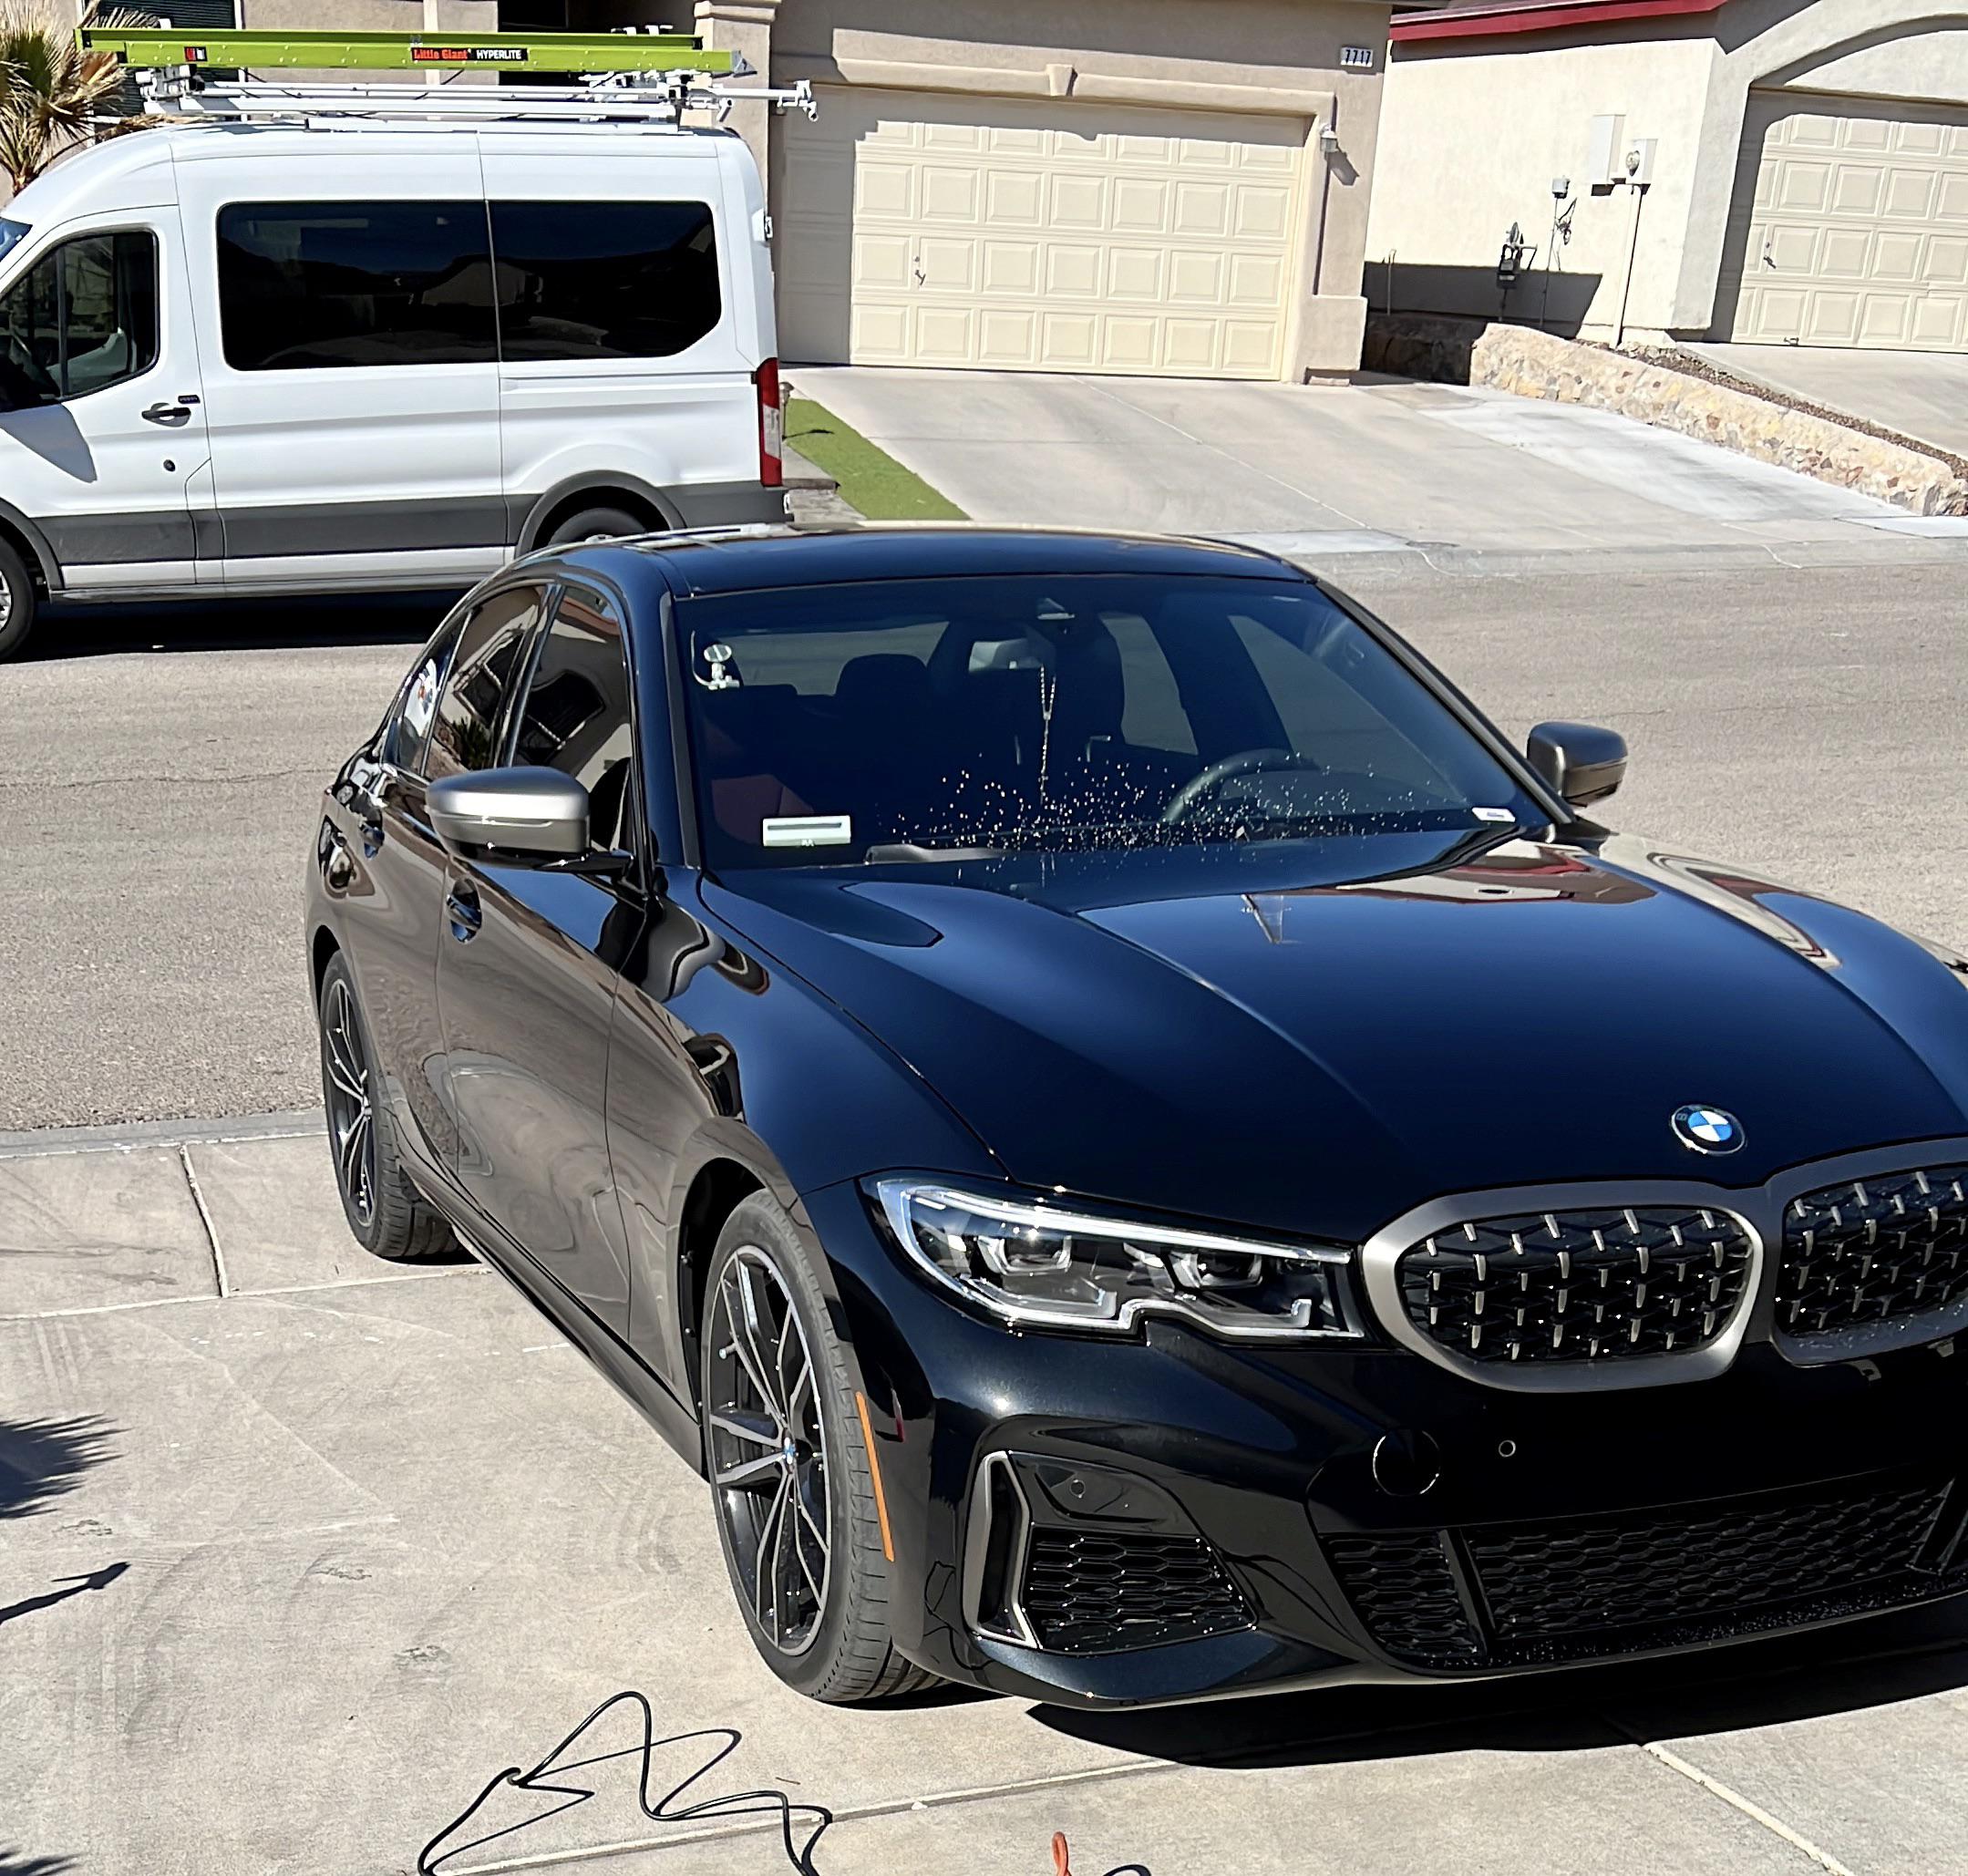 New 2022 M340. Looking for upgrades, addons, accessory suggestions. : r/BMW